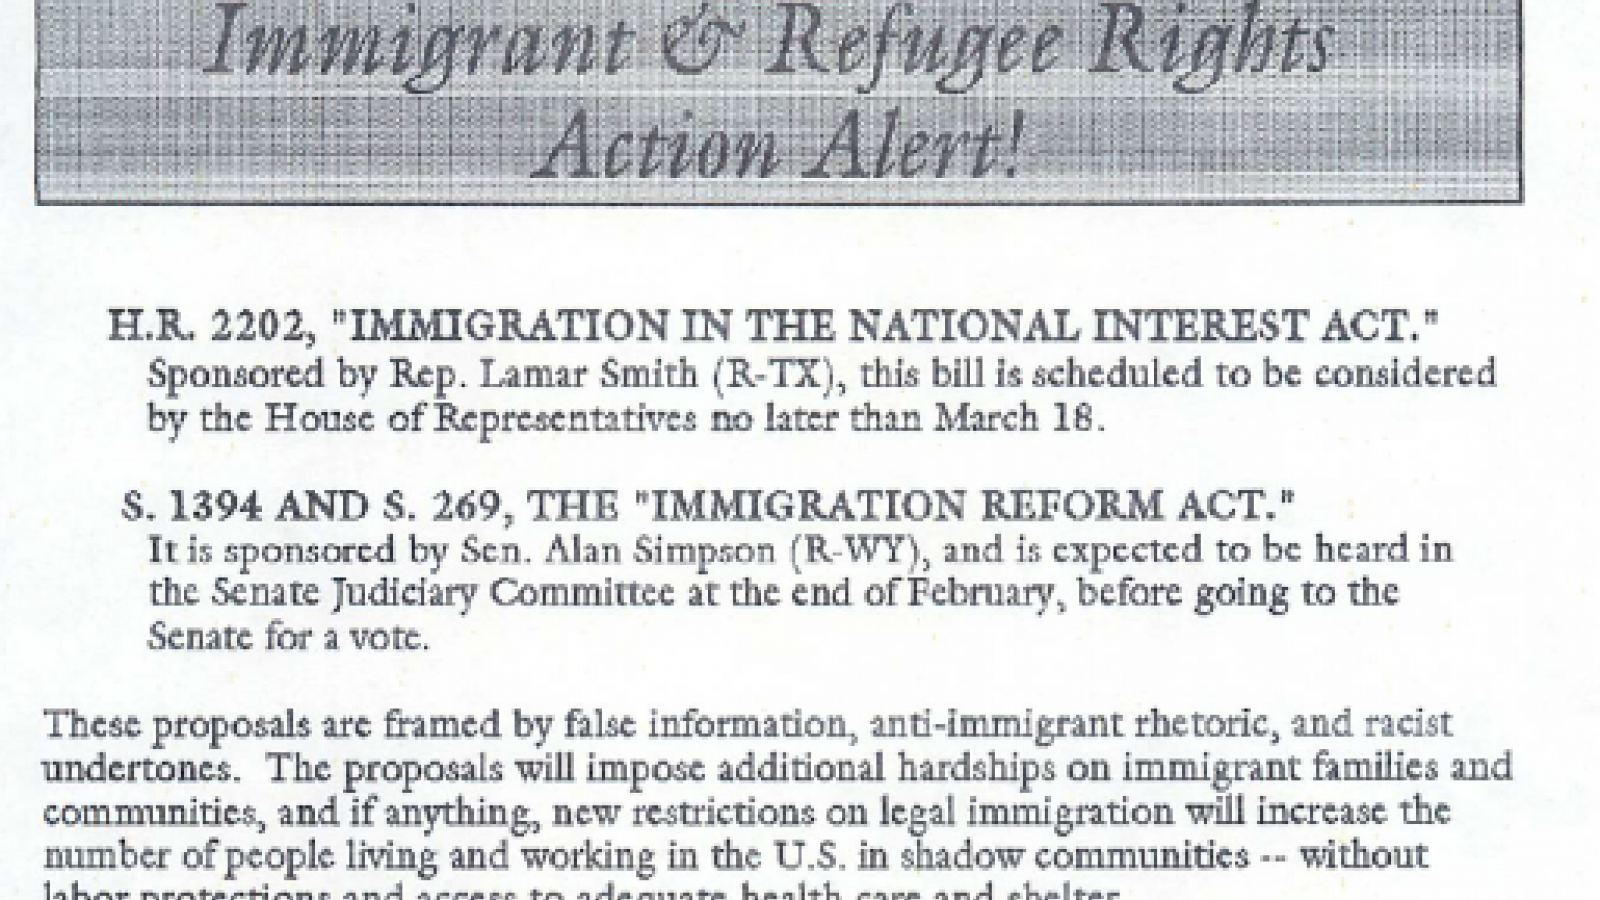 "Immigrant and Refugee Rights Action Alert!" H.R. 2202, S. 1394, and S. 269